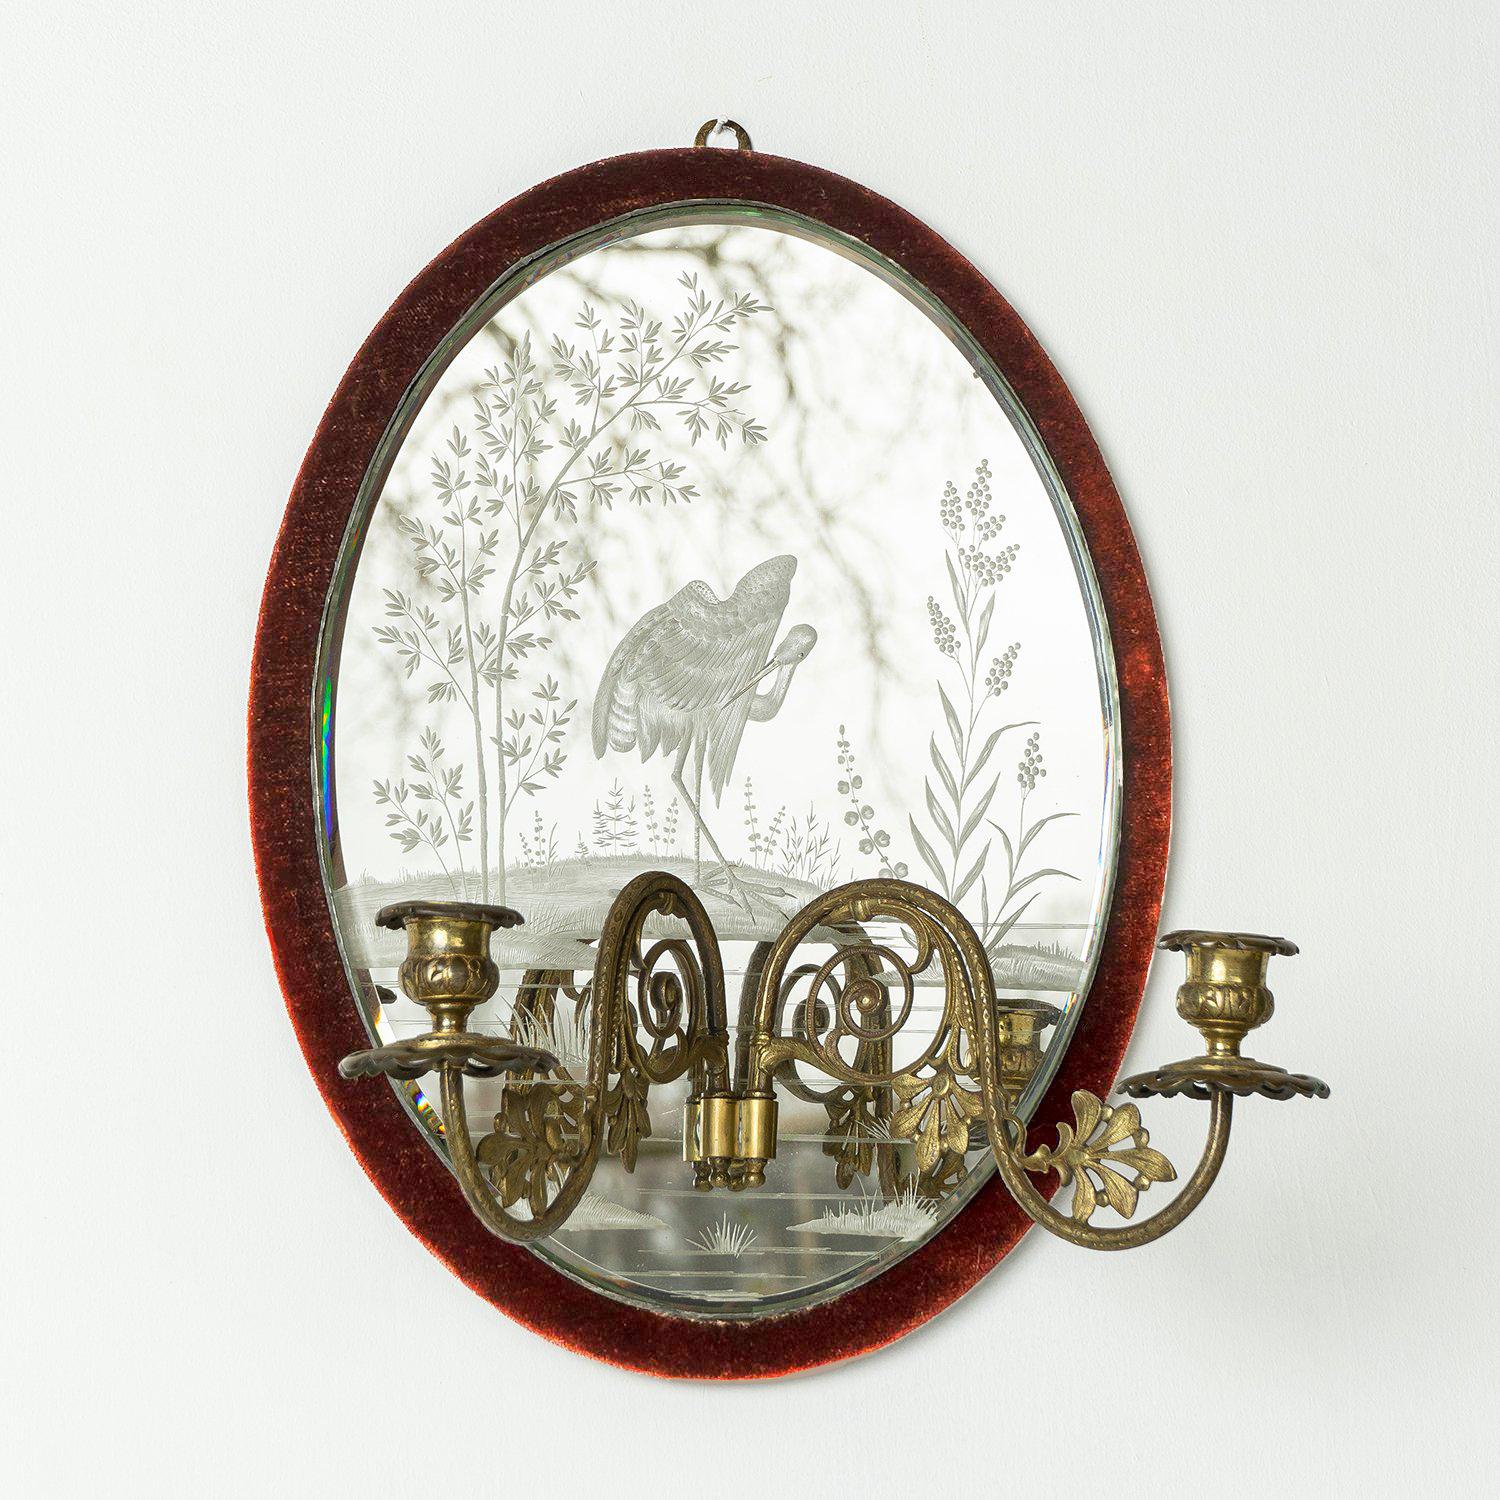 Aesthetic Movement Mirror with Pictorial Natural Scene Etching Depicting a Stork

Excellent quality etching depicting a stork in its natural habitat on the reverse side of the mirror glass.

Bevelled-edged oval glass with a dark red velvet